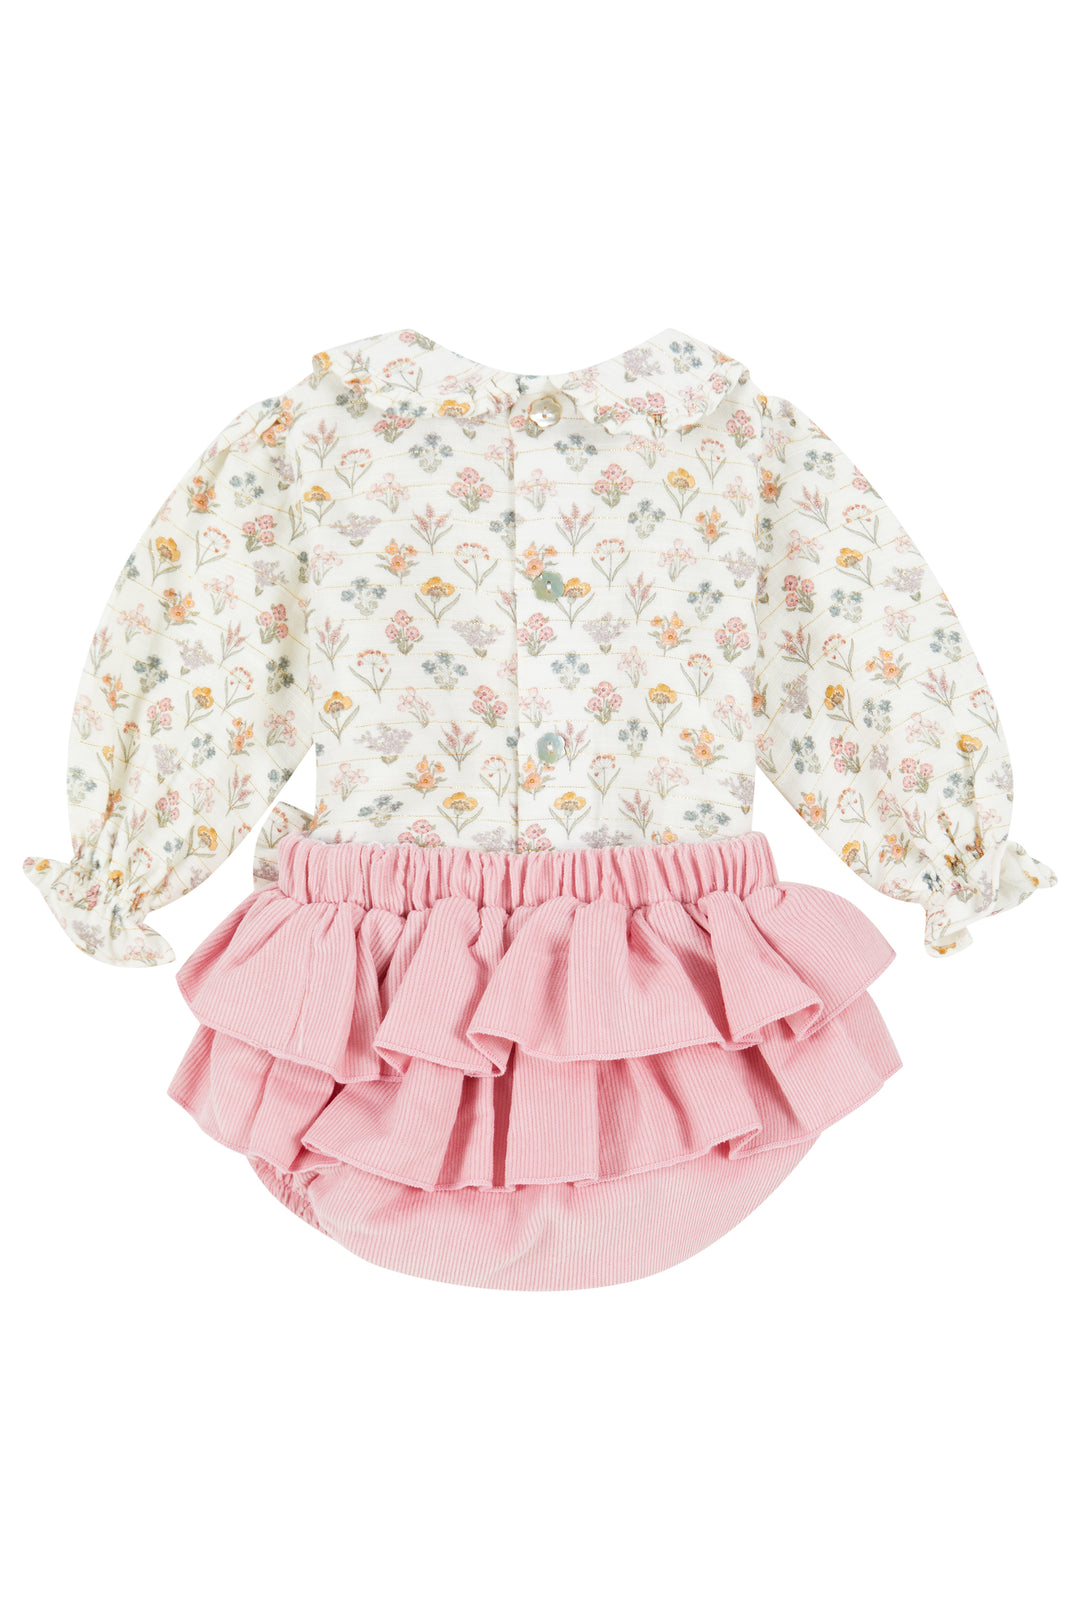 Deolinda "Lana" Dusky Pink Floral Blouse & Cord Bloomers | Millie and John